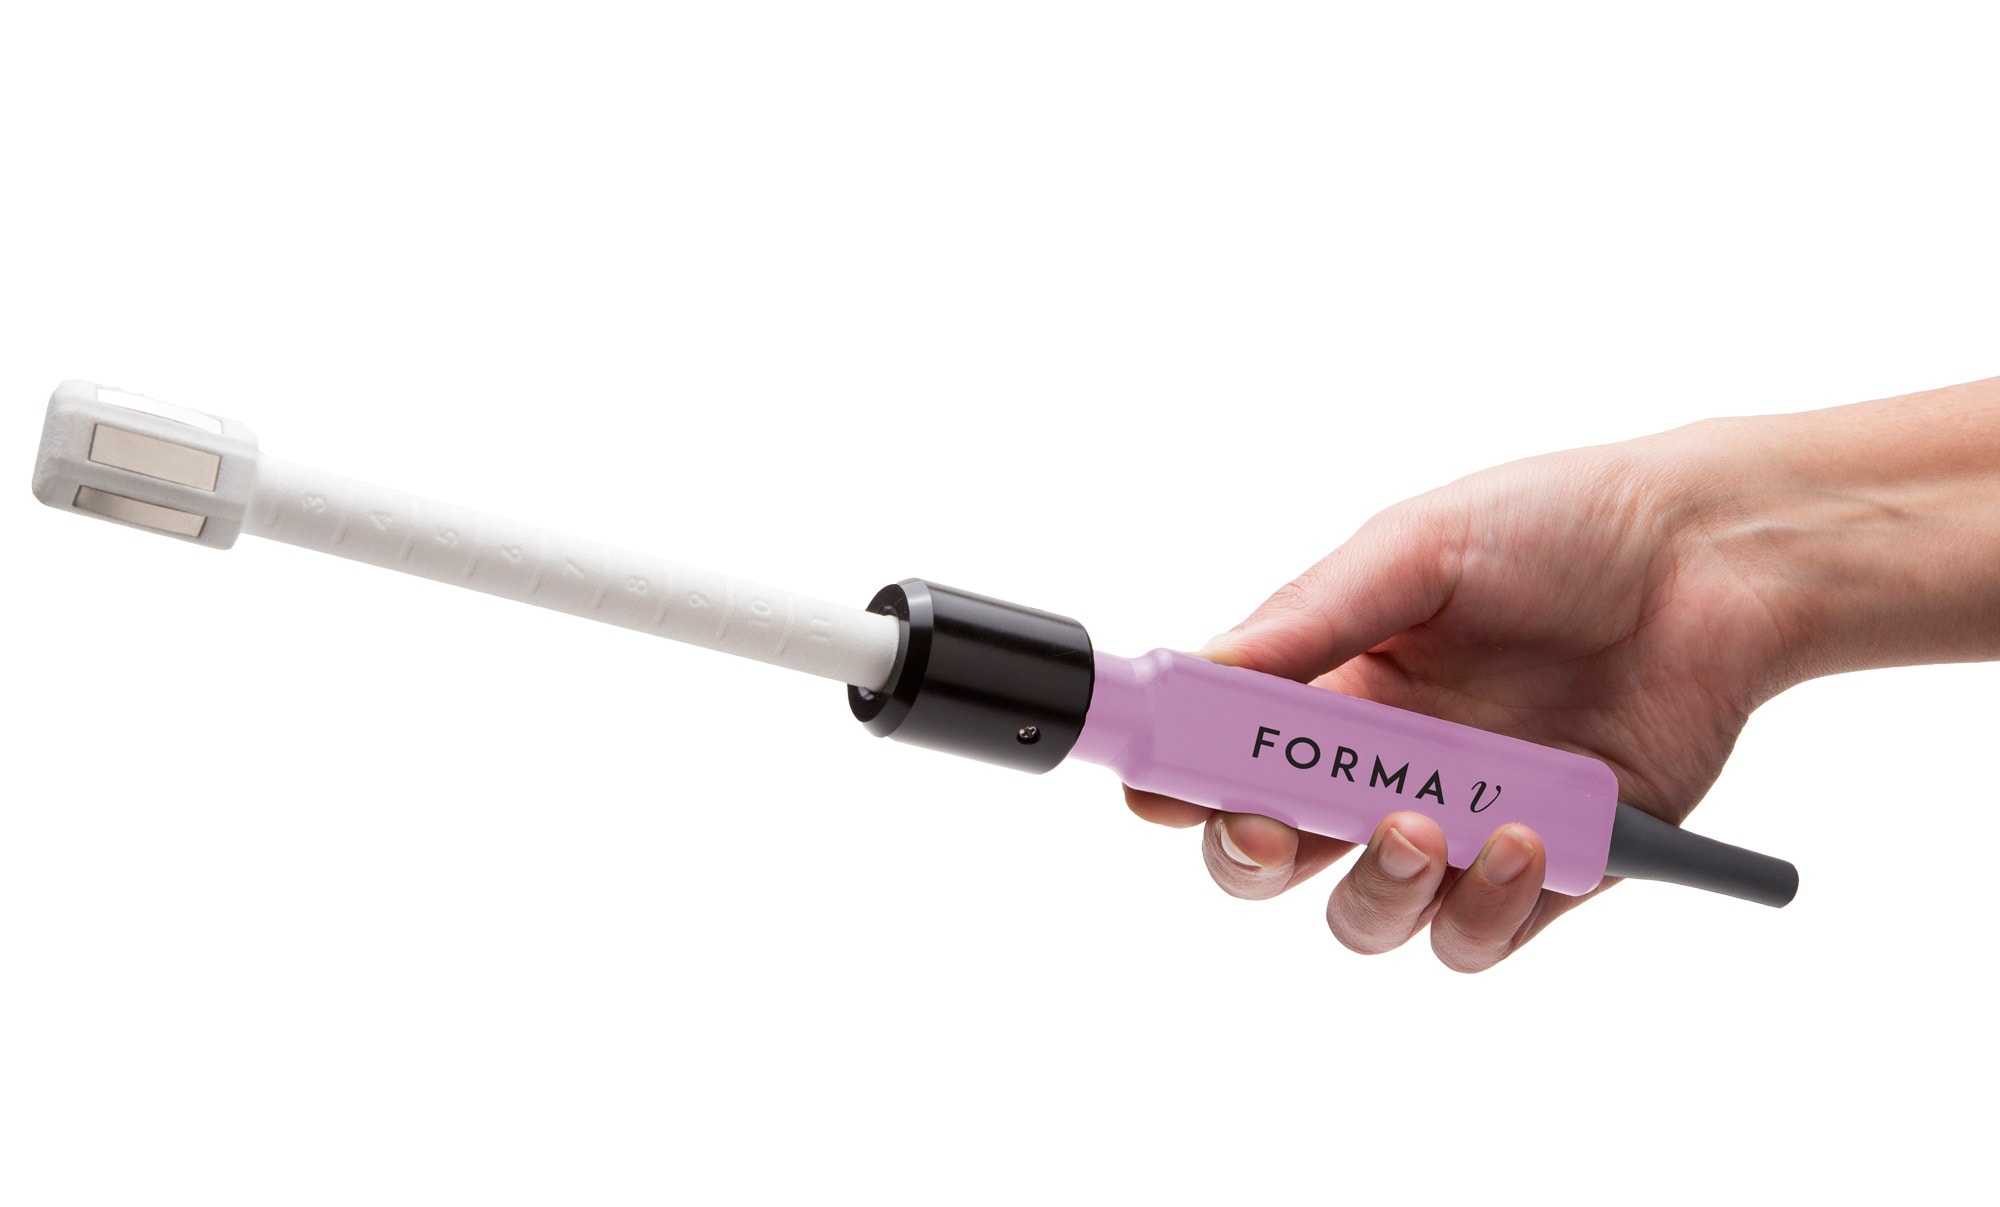 Using bipolar radio frequency, the Forma handpiece stimulates collagen and elastin production for increased bladder control